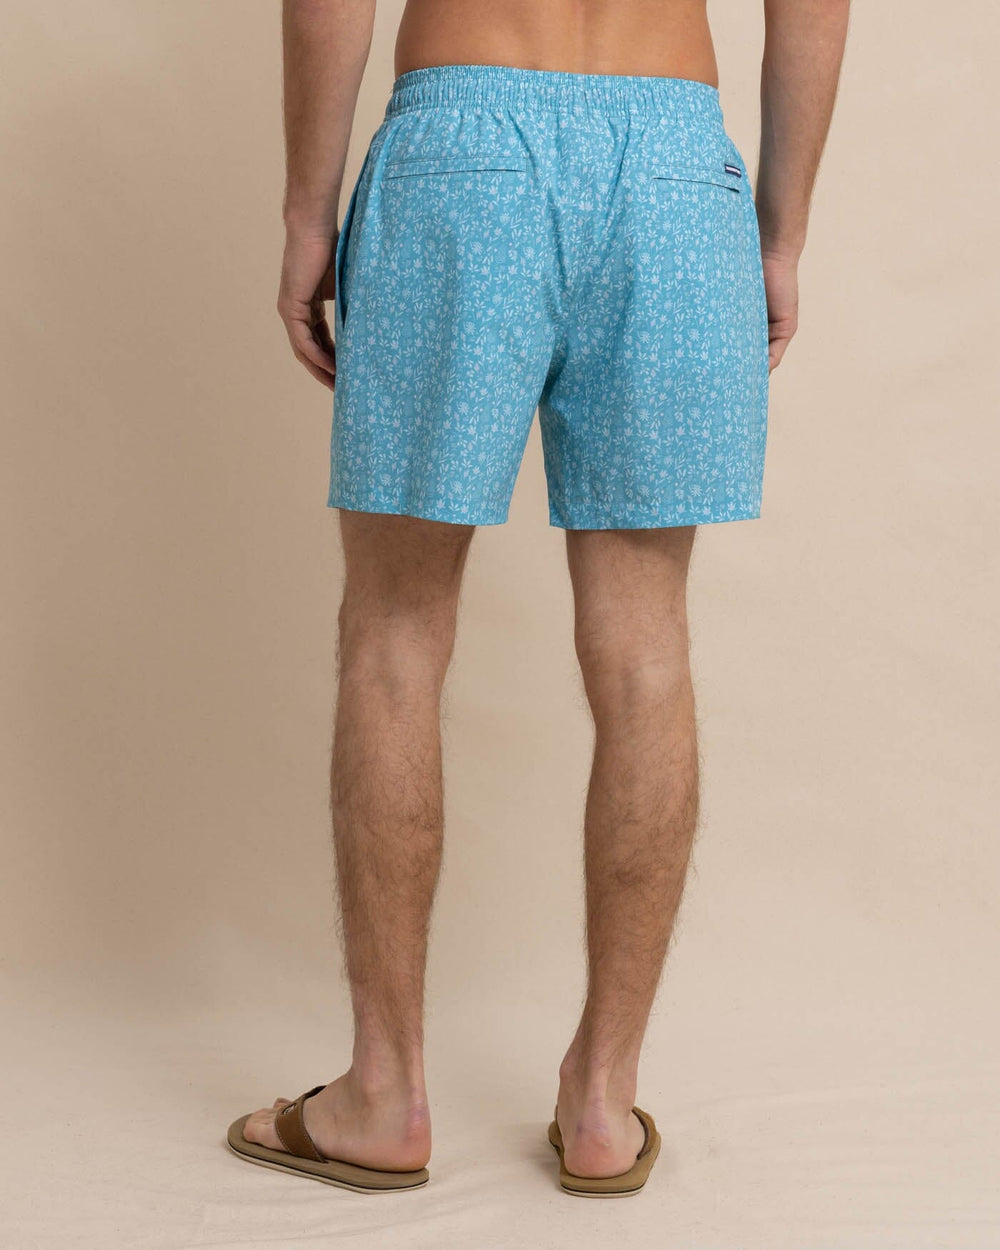 The back view of the Southern Tide Ditzy Floral Swim Trunk by Southern Tide - Ocean Aqua